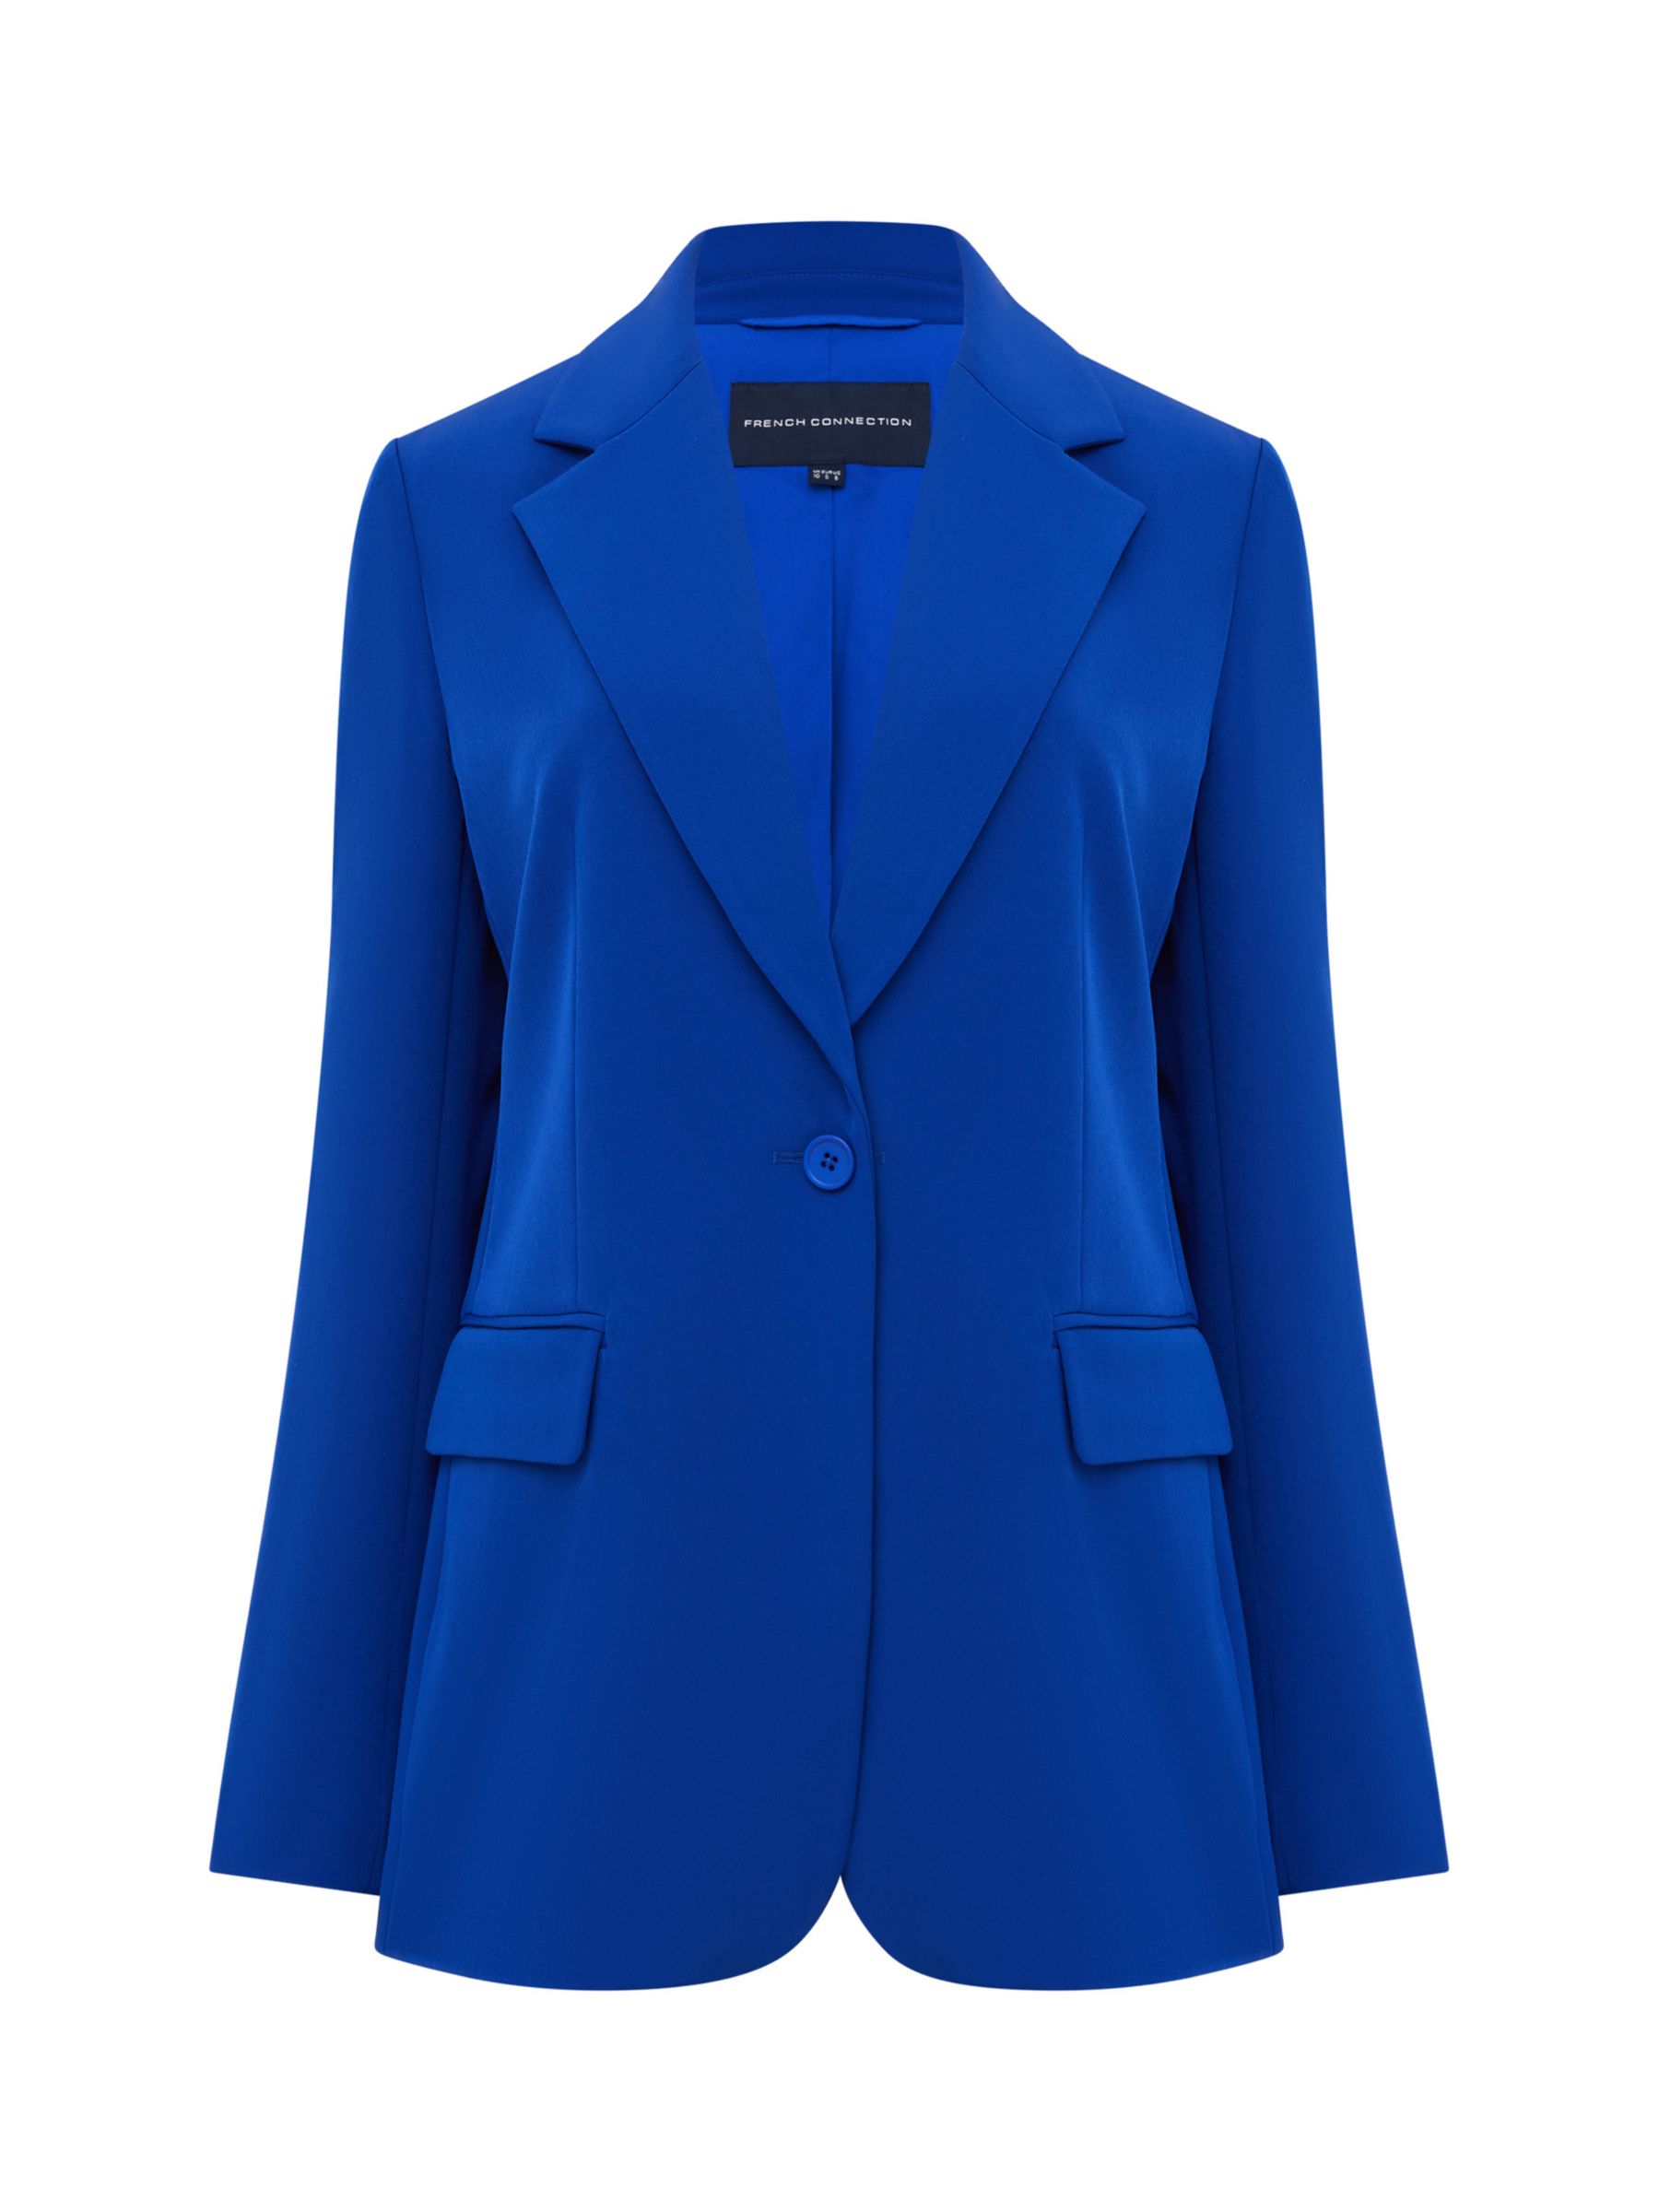 Buy French Connection Echo Single Breasted Blazer, Cobalt Blue Online at johnlewis.com